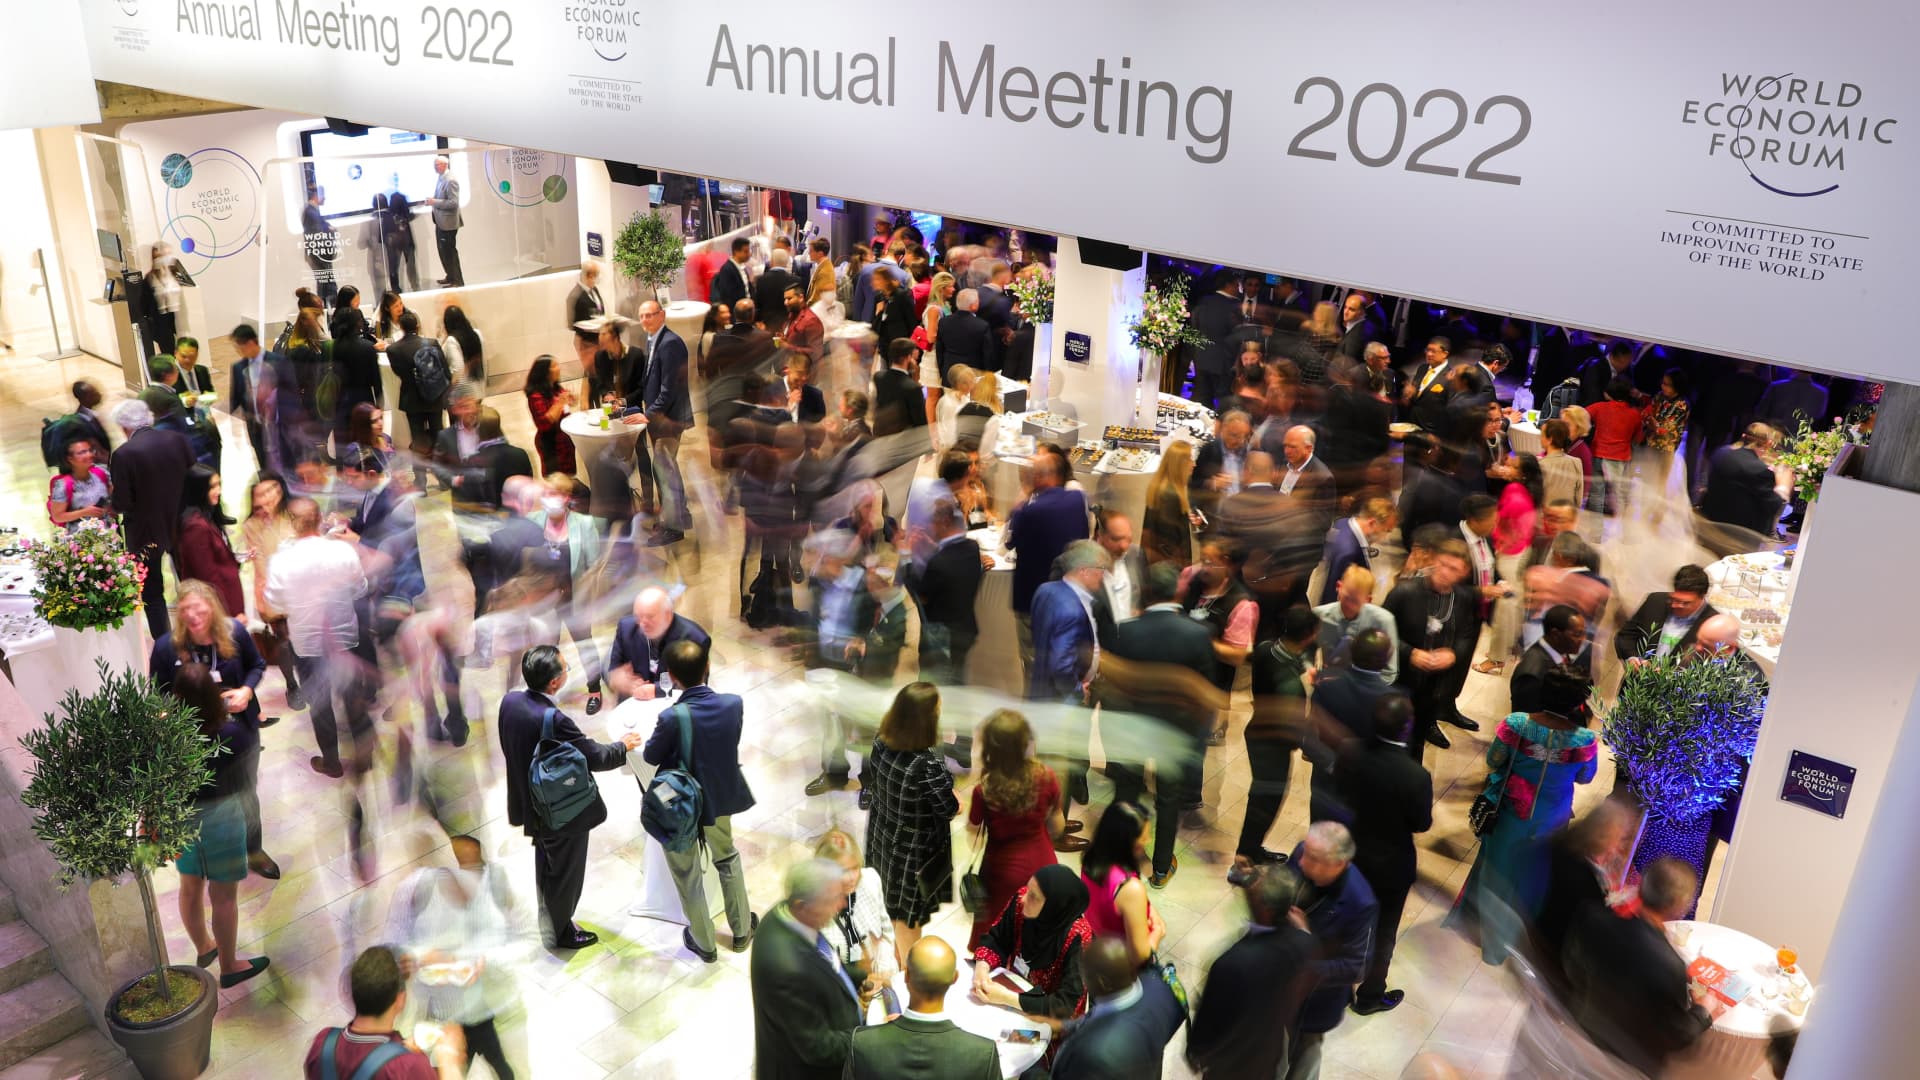 Business and political leaders gathered in the Swiss hilltop town of Davos in May 2022 for the World Economic Forum.